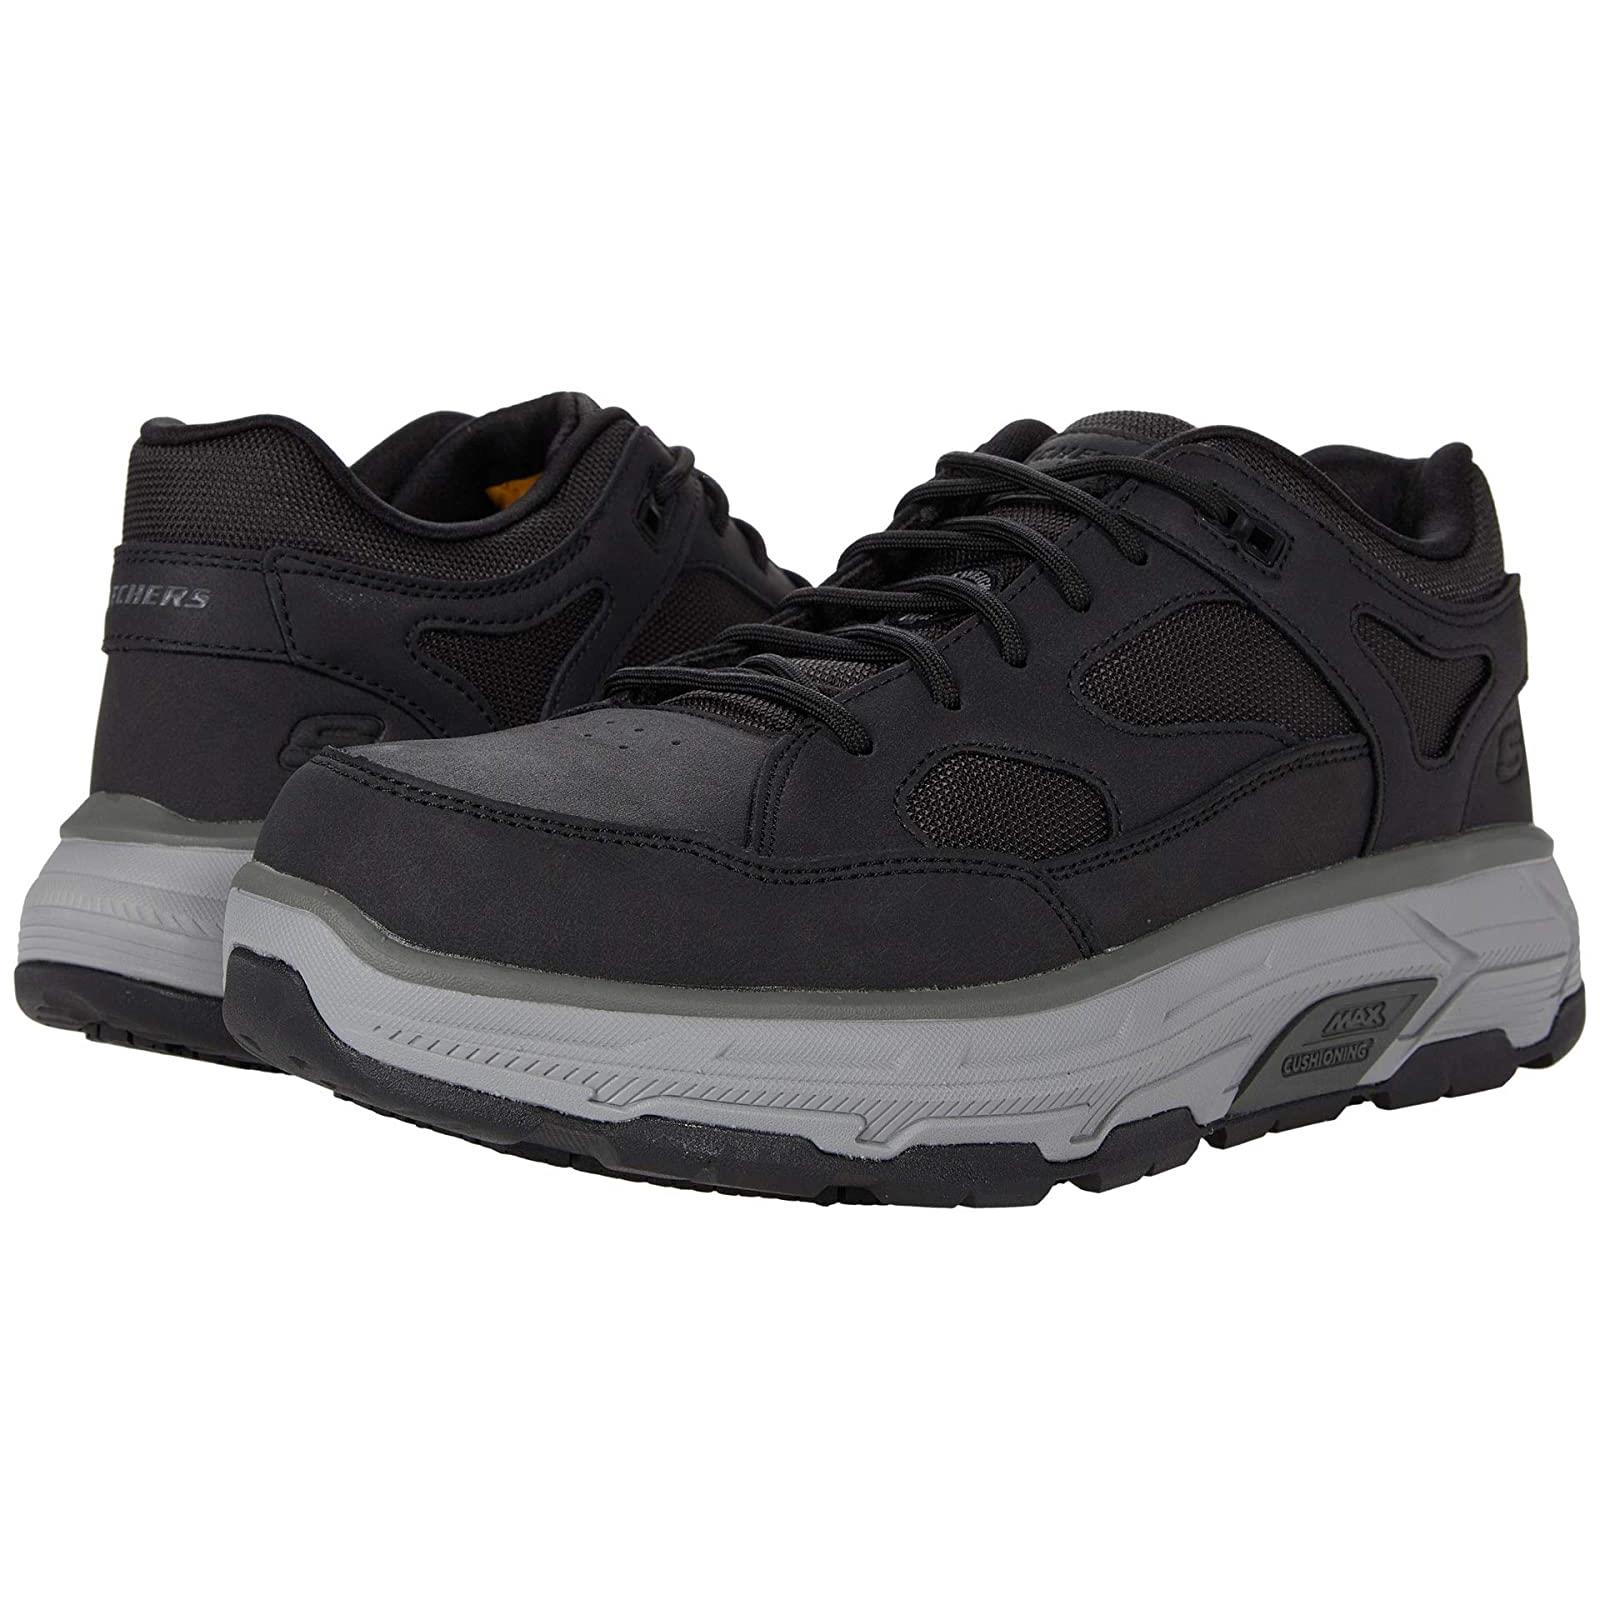 Man`s Sneakers Athletic Shoes Skechers Work Max Stout ST Alloy Toe Black